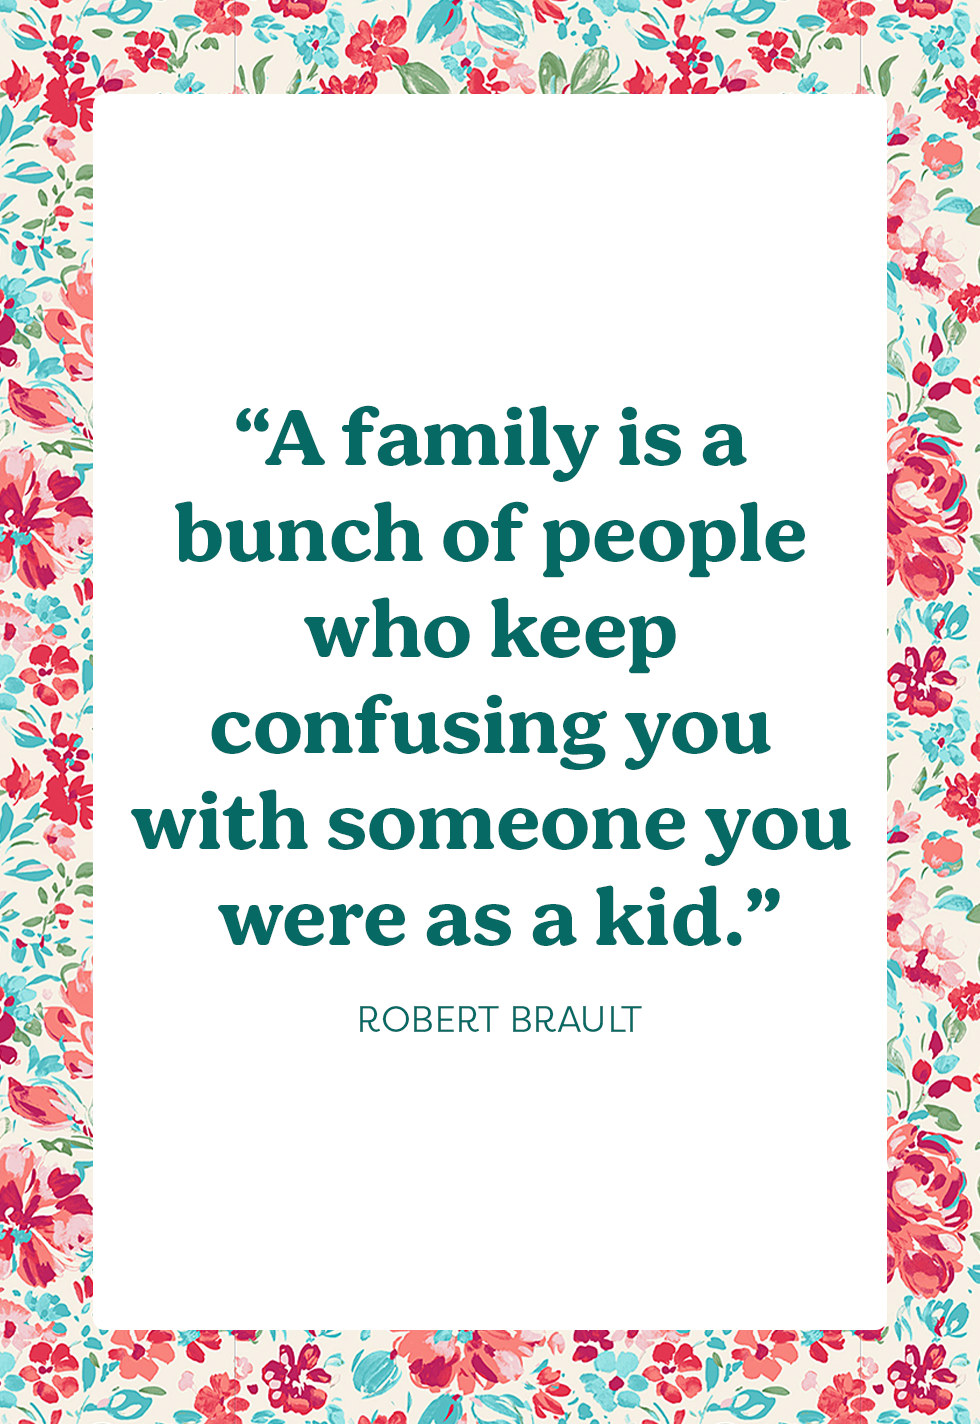 85 Best Family Quotes to Share With Your Loved Ones